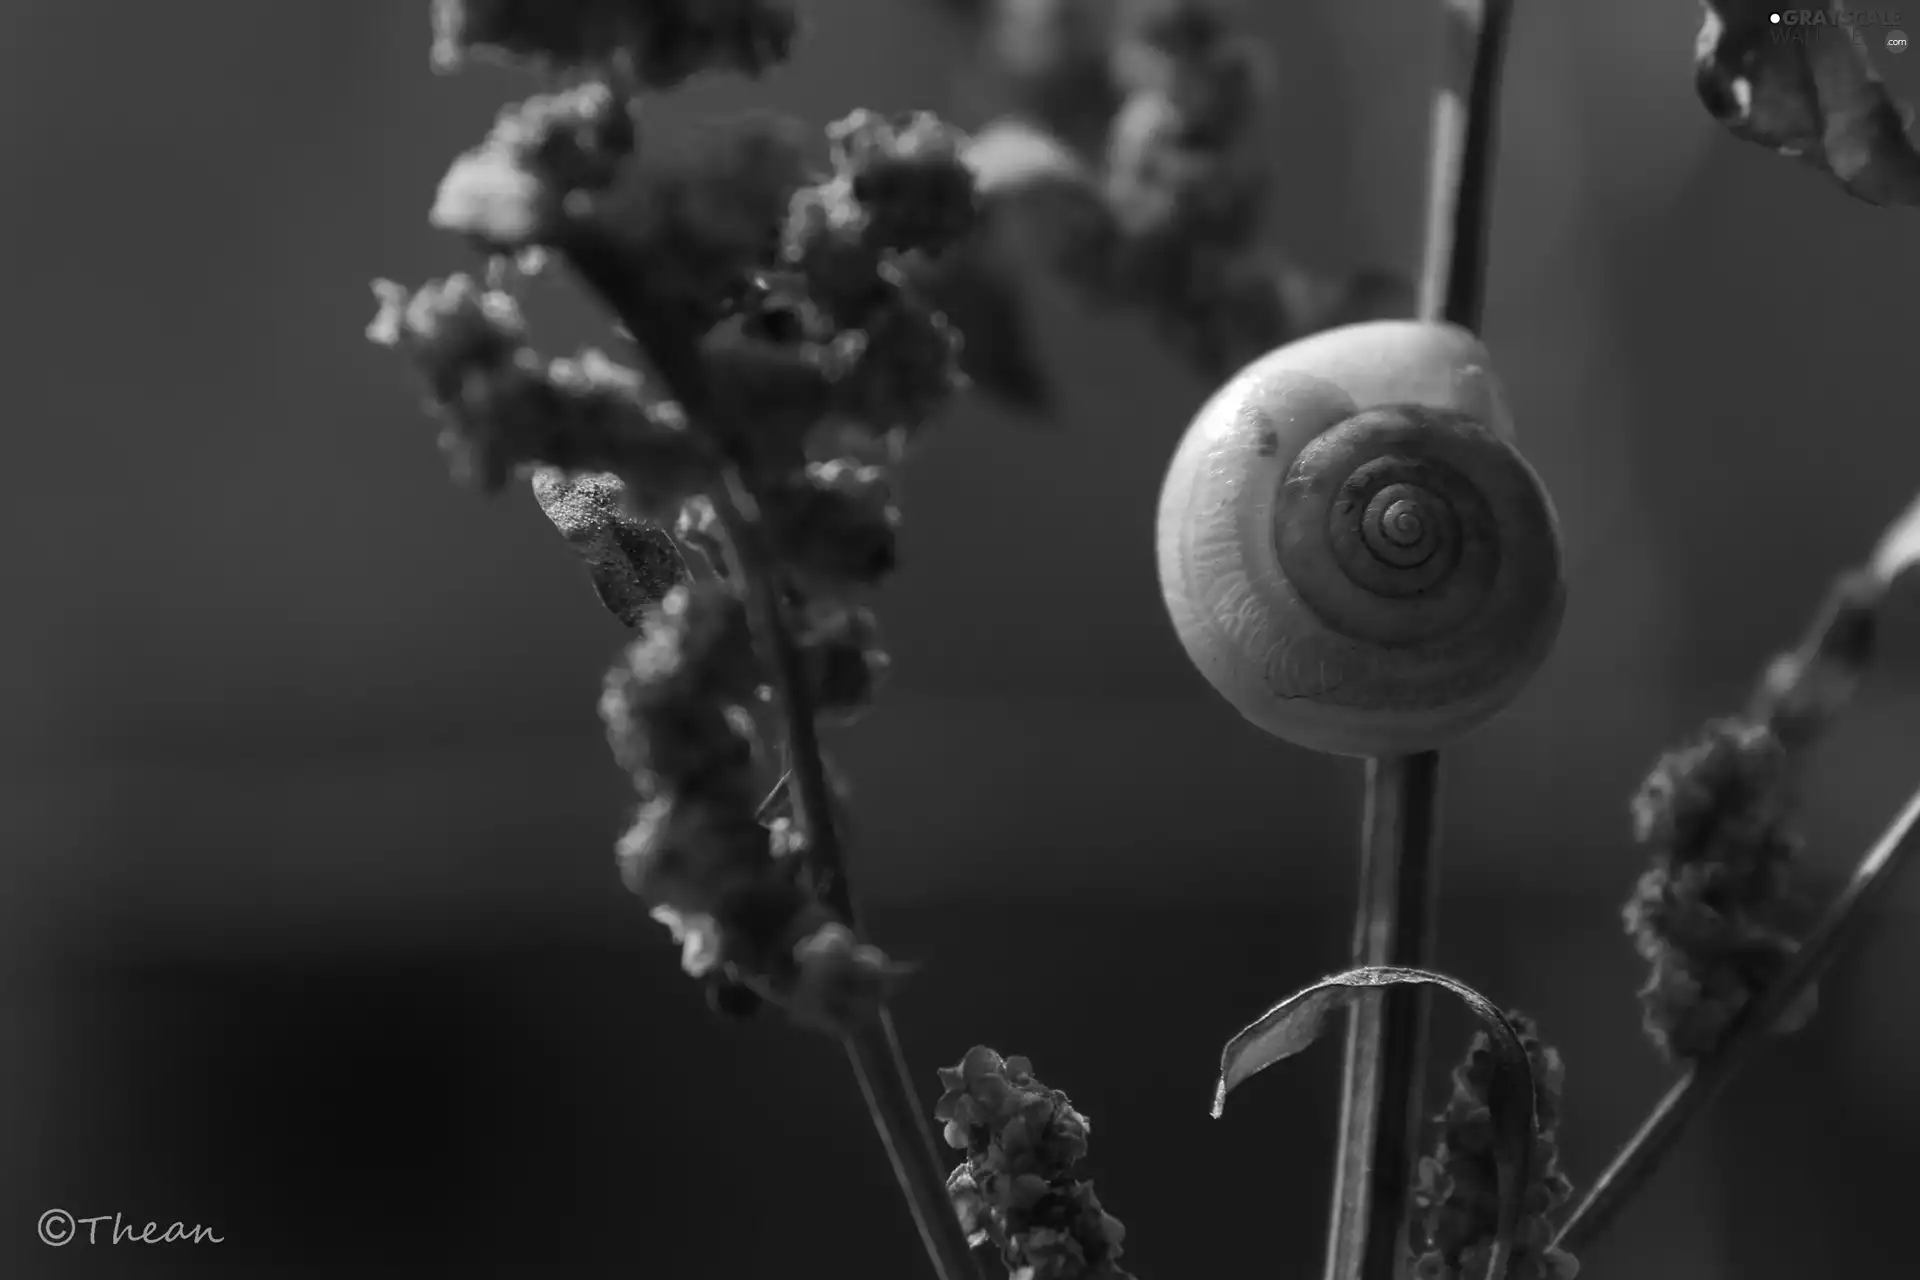 snail, The herb